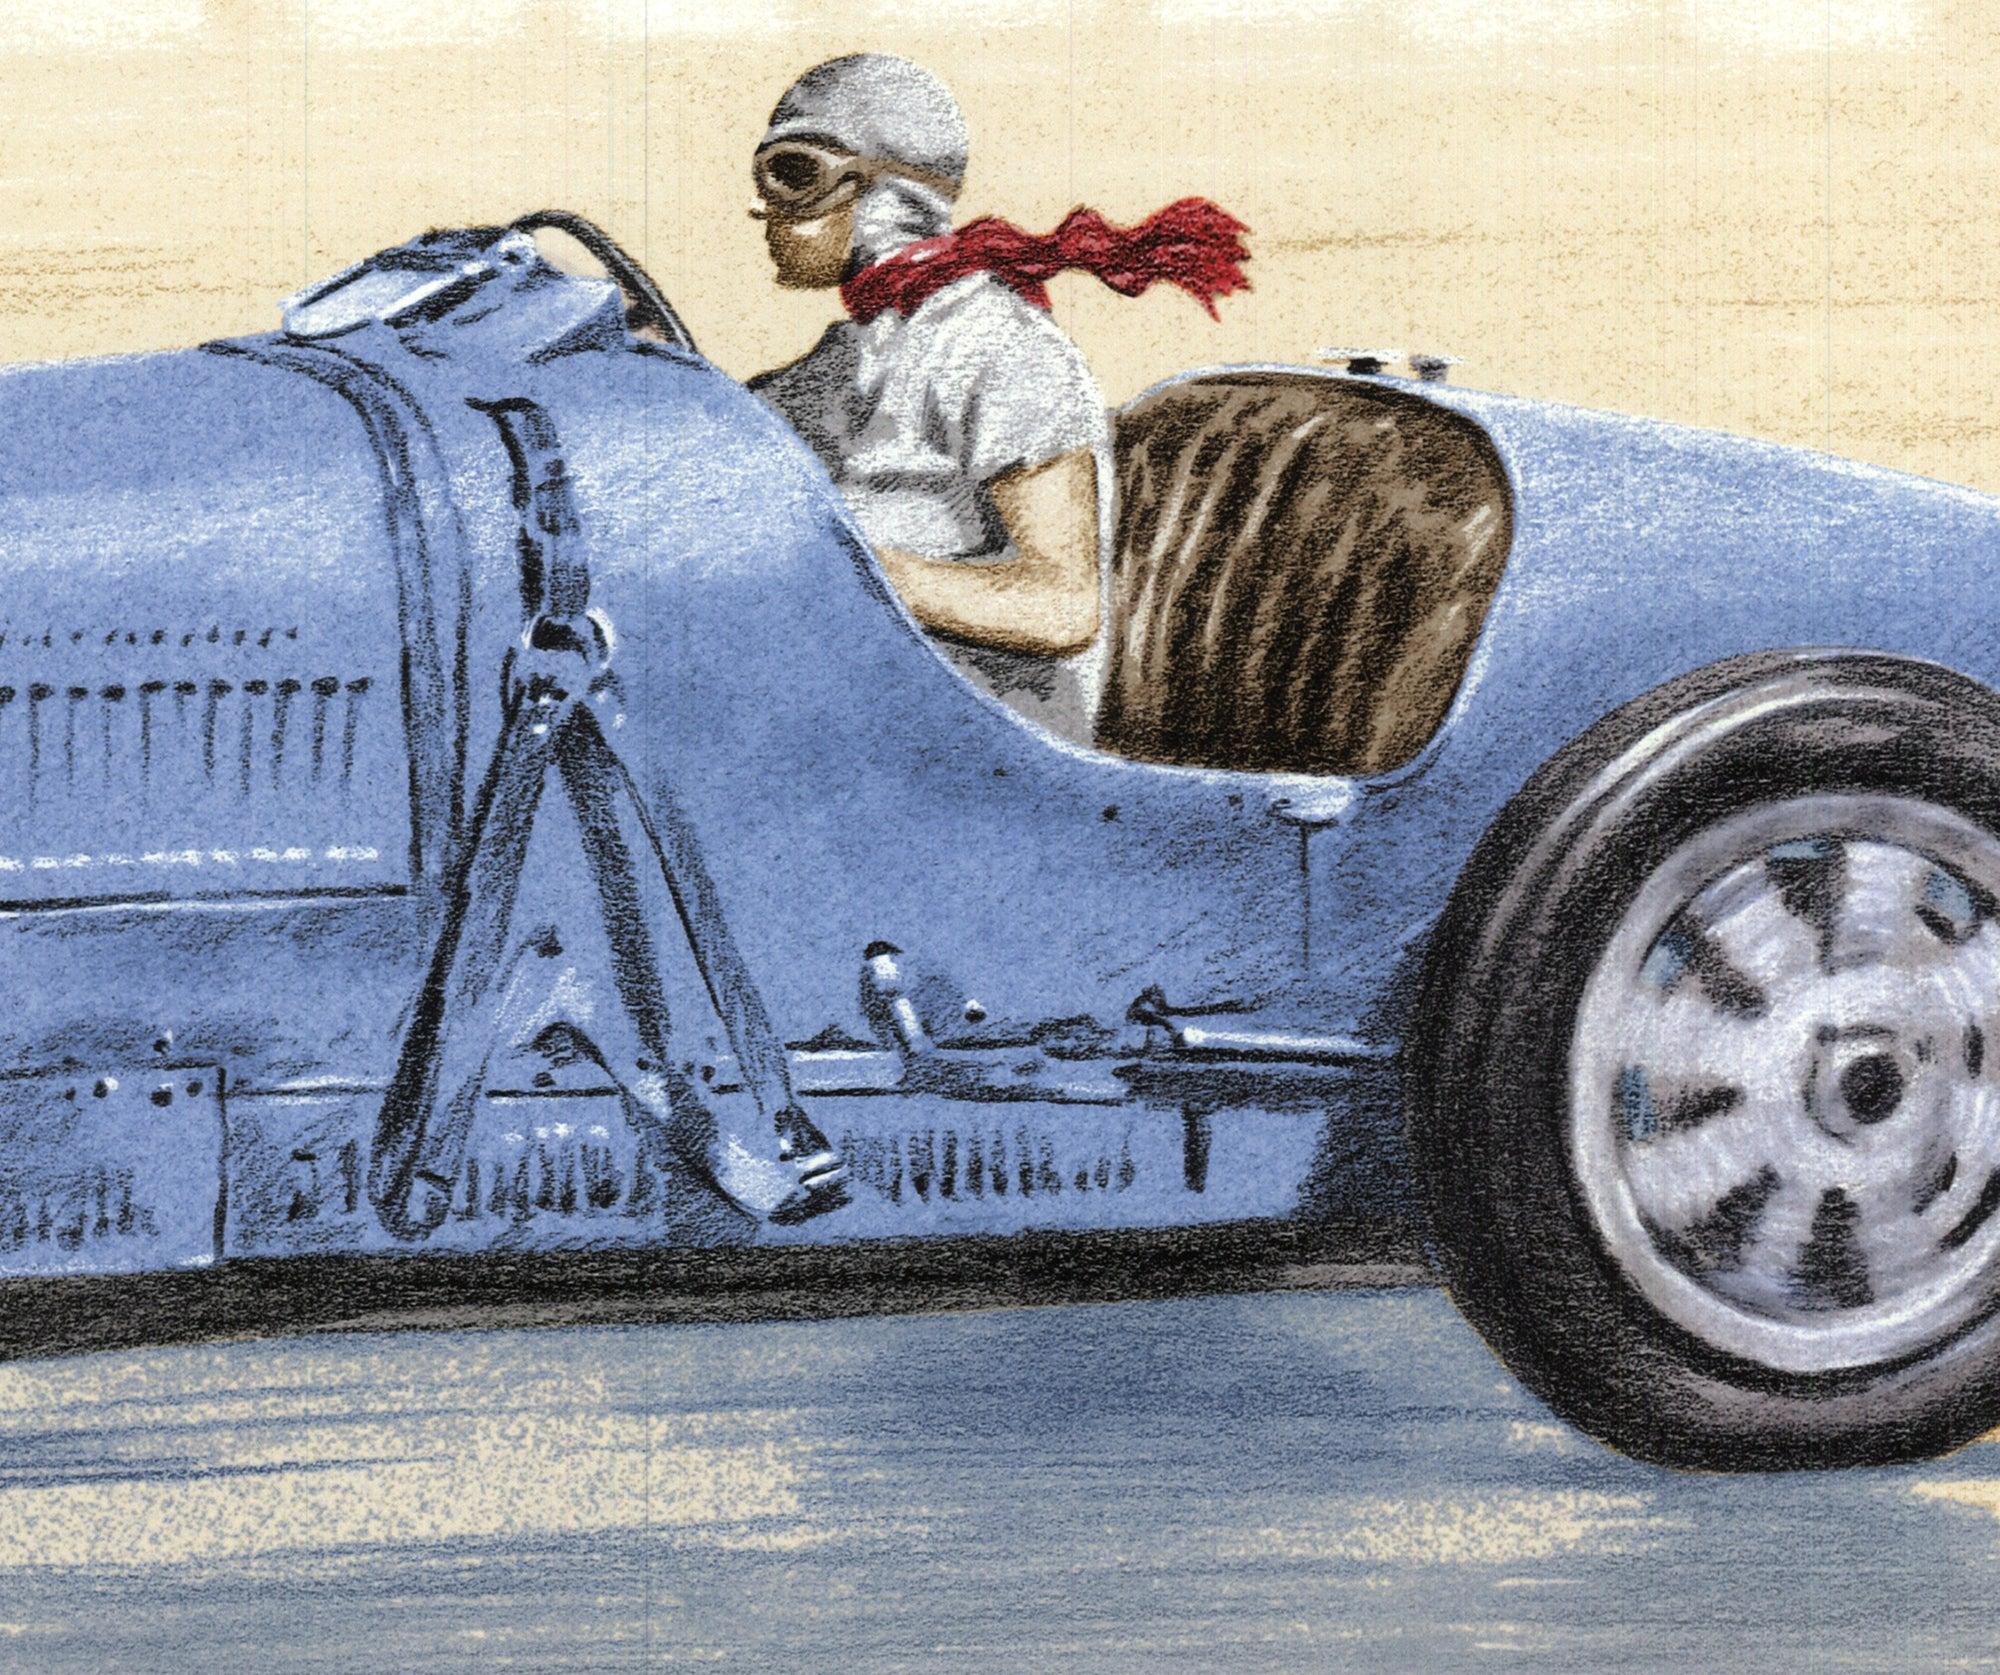 The first printing lithograph signed and numbered by La Victoire, depicting Heel Nice in her Bugatti Type 35 on the beach of La Baule, is a valuable and culturally significant piece of art. The limited edition and the artist’s signature enhance its